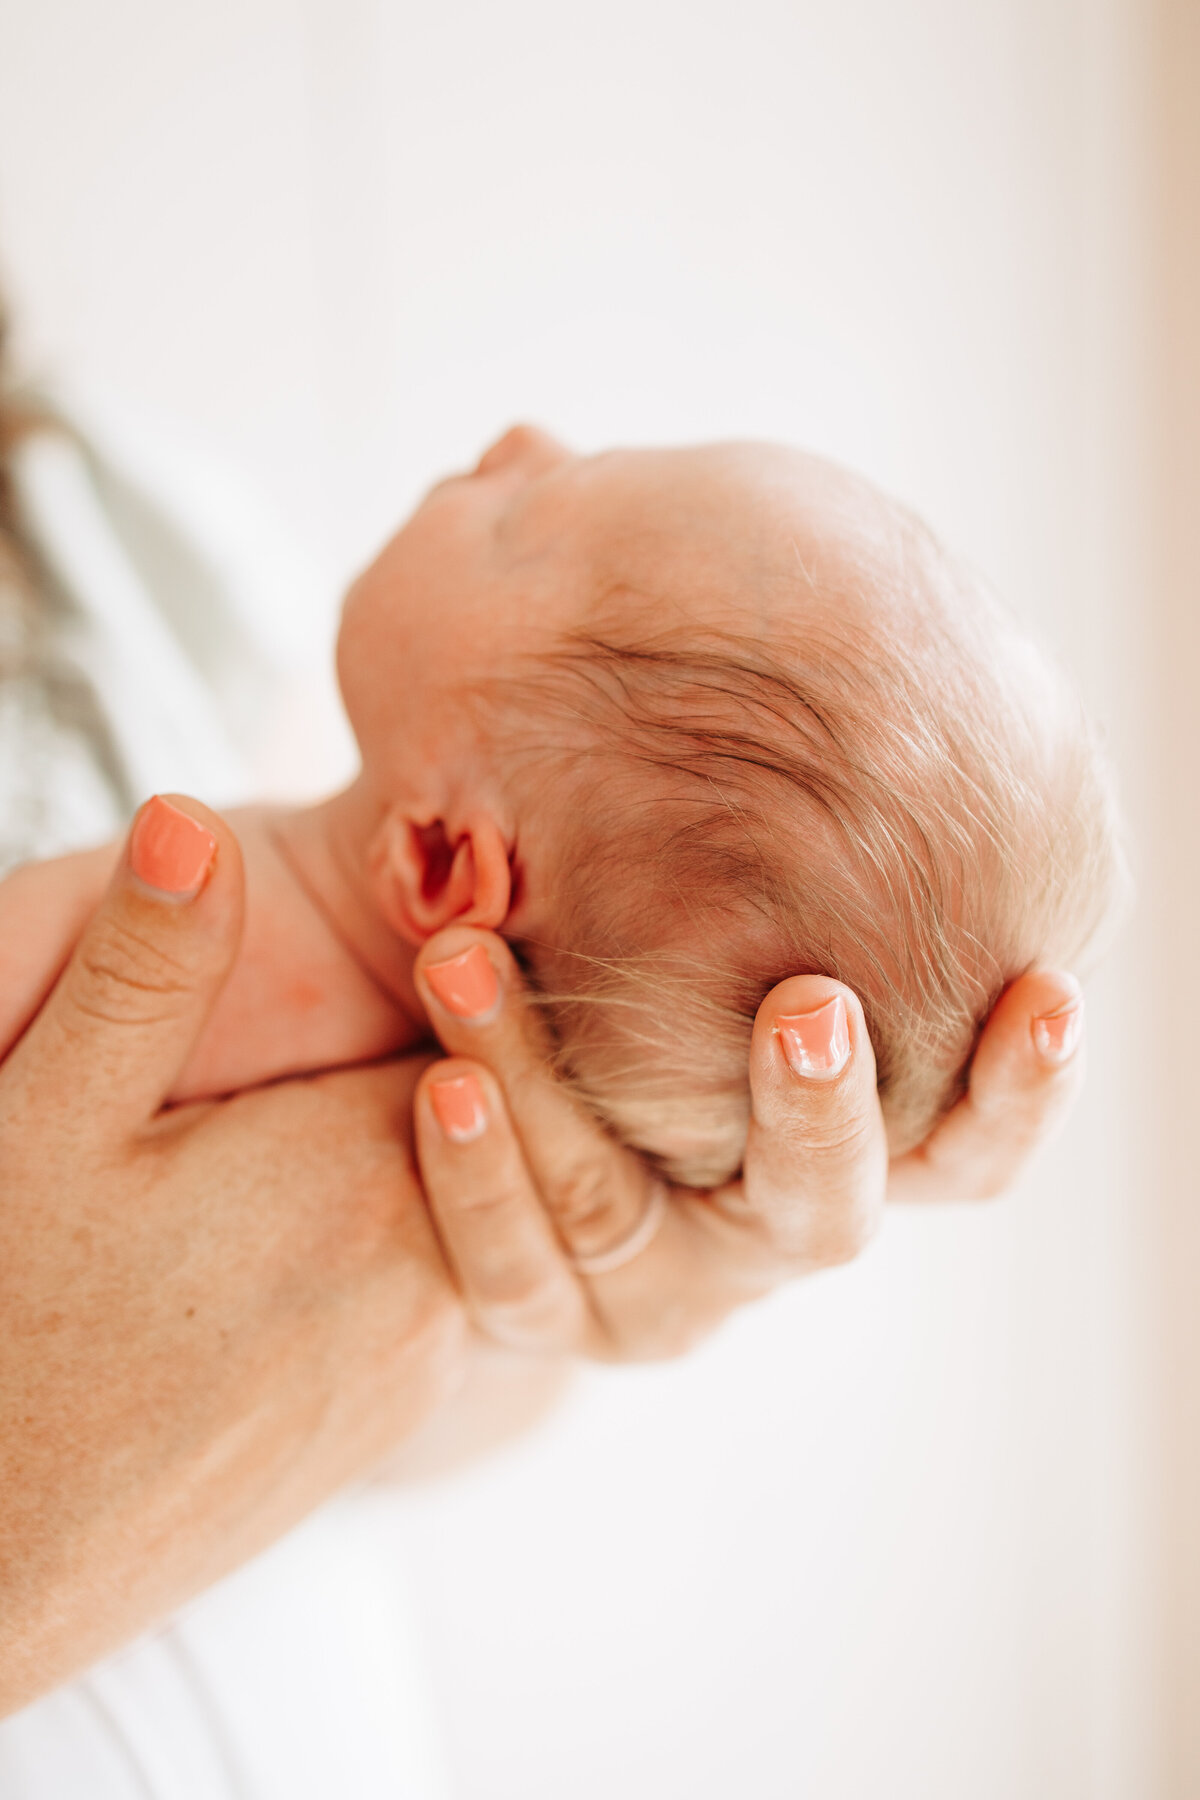 newborn baby being held during a newborn session